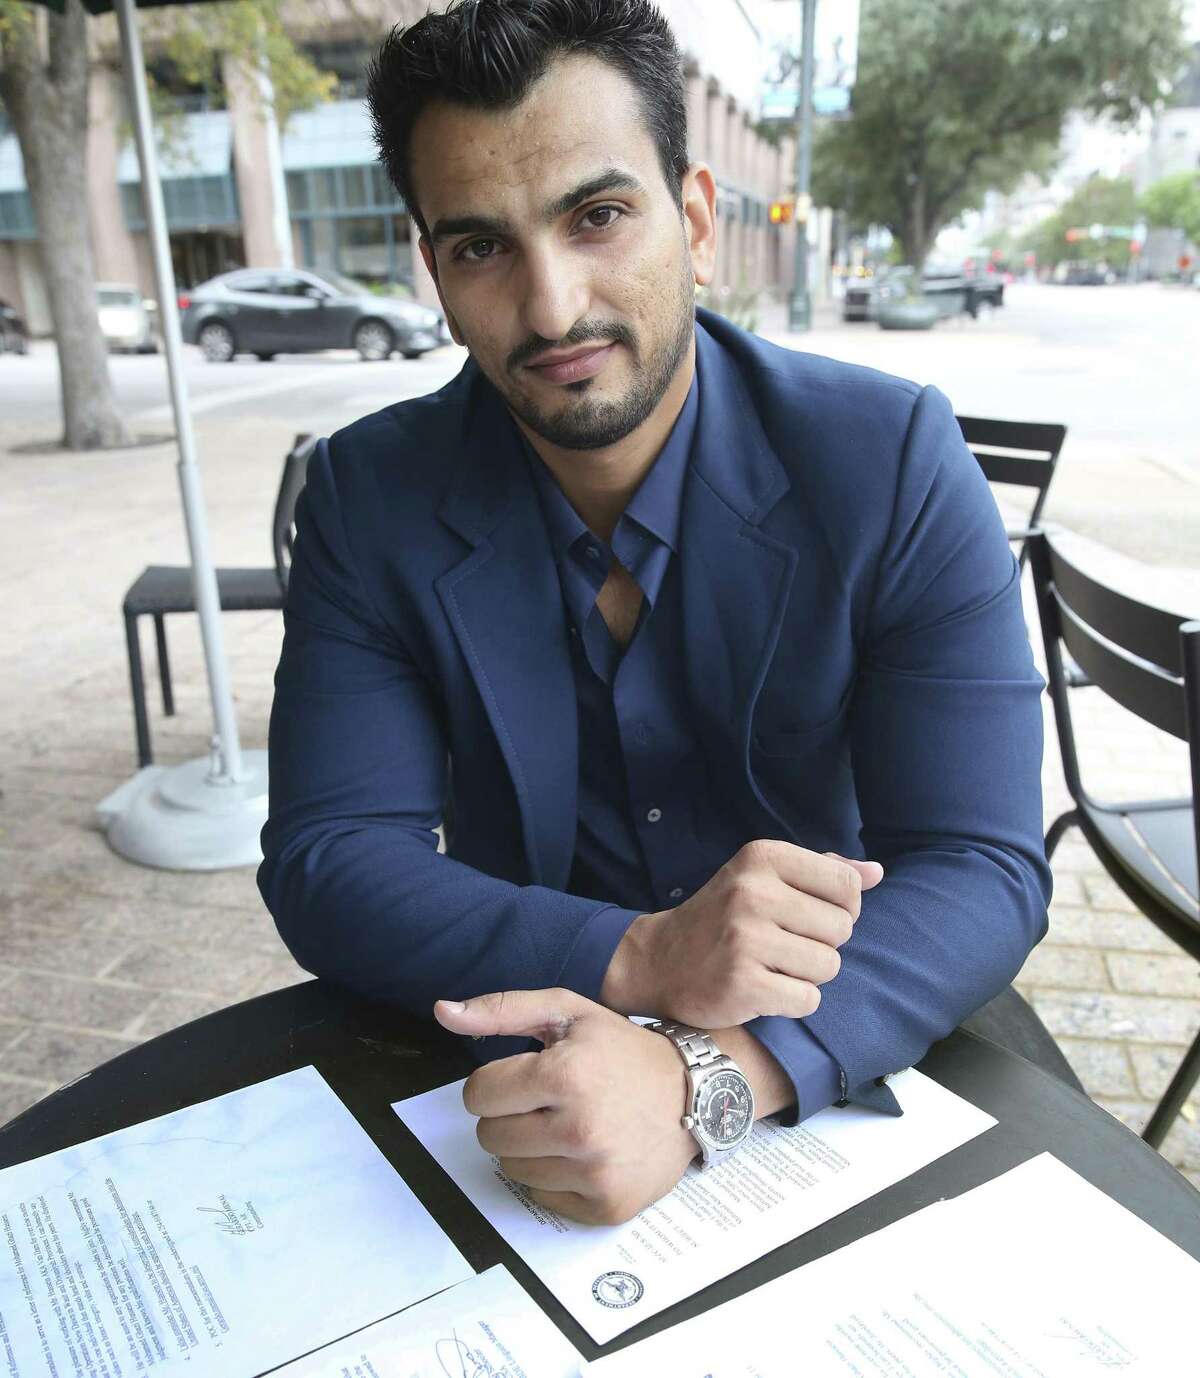 “I always enjoyed it because I want to help people,” Mohanad Albdairi says of his five years serving U.S. forces in Iraq as an interpreter. He is unable to serve in the Reserve or Guard forces, and active duty — which comes with its own set of obstacles for immigrants — is not an option for him.